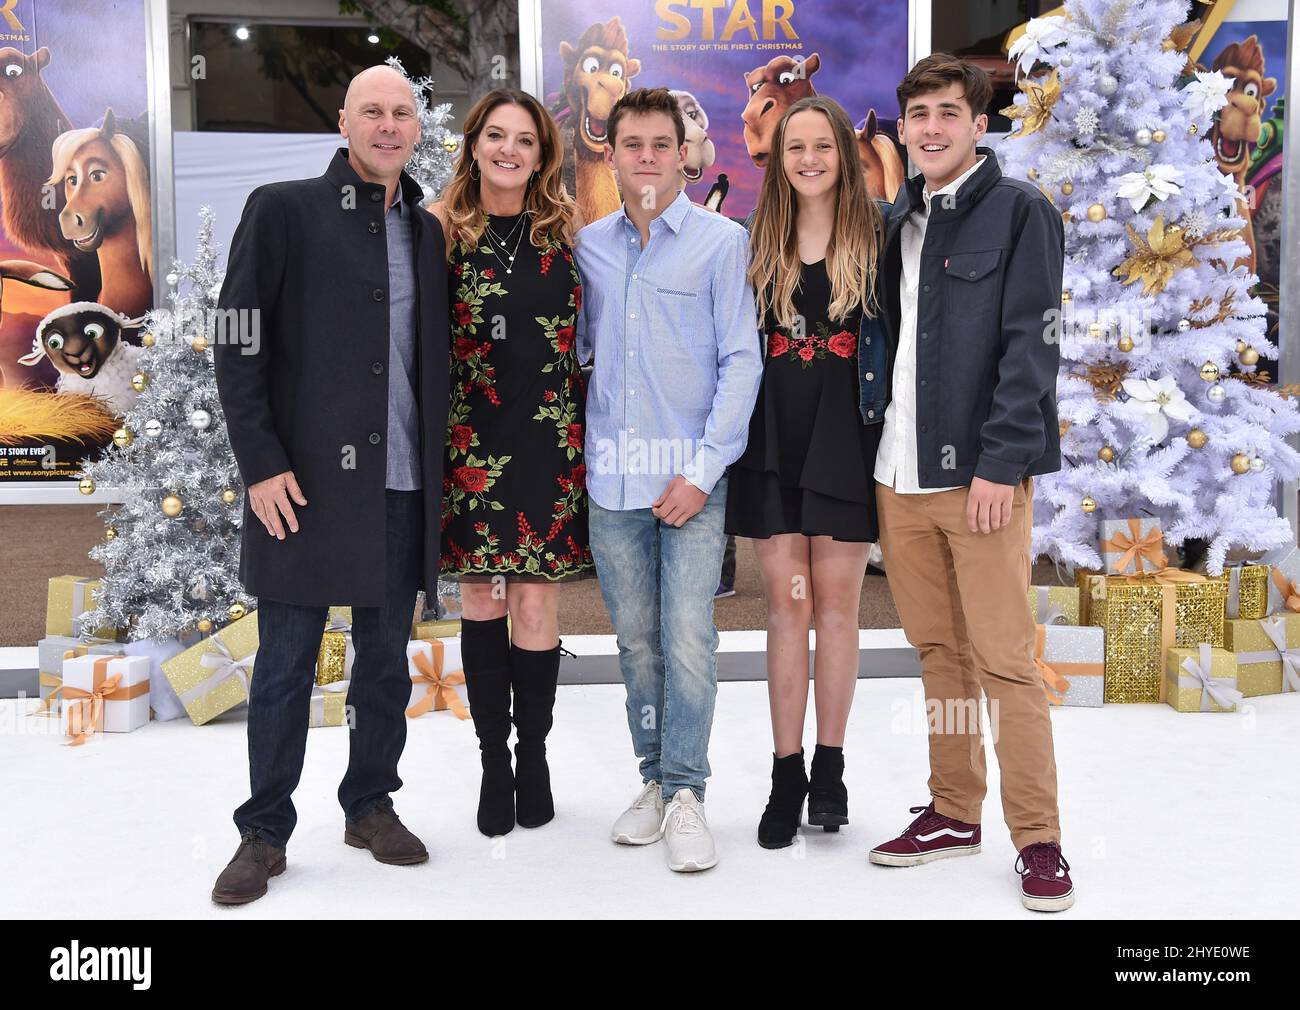 Stewart Cook, Jennifer Magee-Cook, Nick Cook, Sydney Cook and Ja attending the world premiere of The Star, in Los Angeles, California Stock Photo